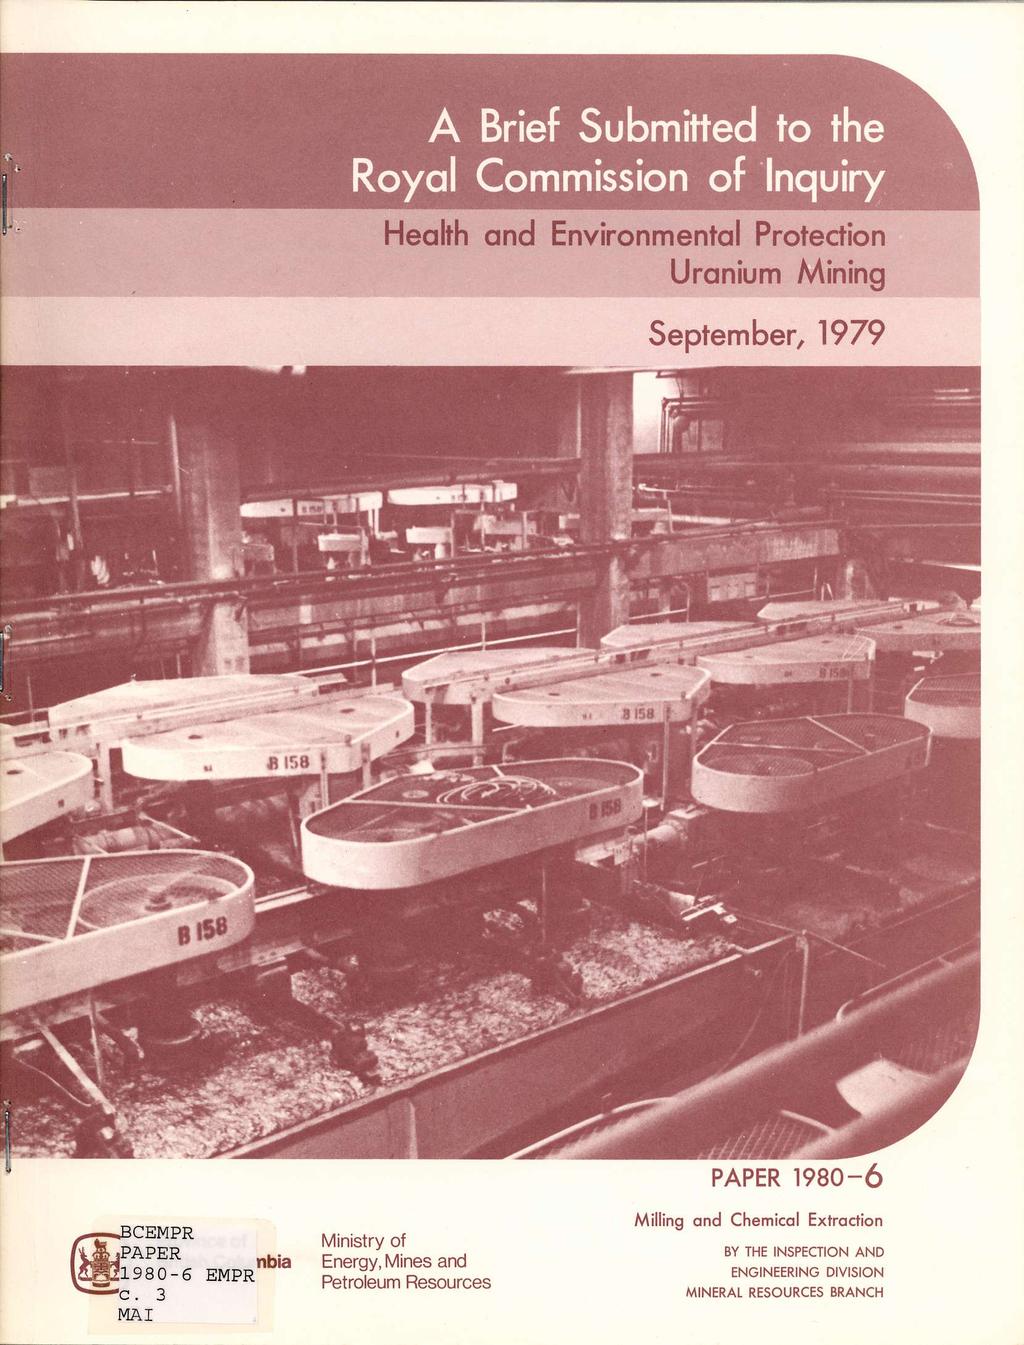 A Brief Submitted to the Royal Commission of Inquiry Health and Environmental Protection Uranium Mining September, 1979 PAPER 1980-6 CEMPR jpaper nbia 21980-6